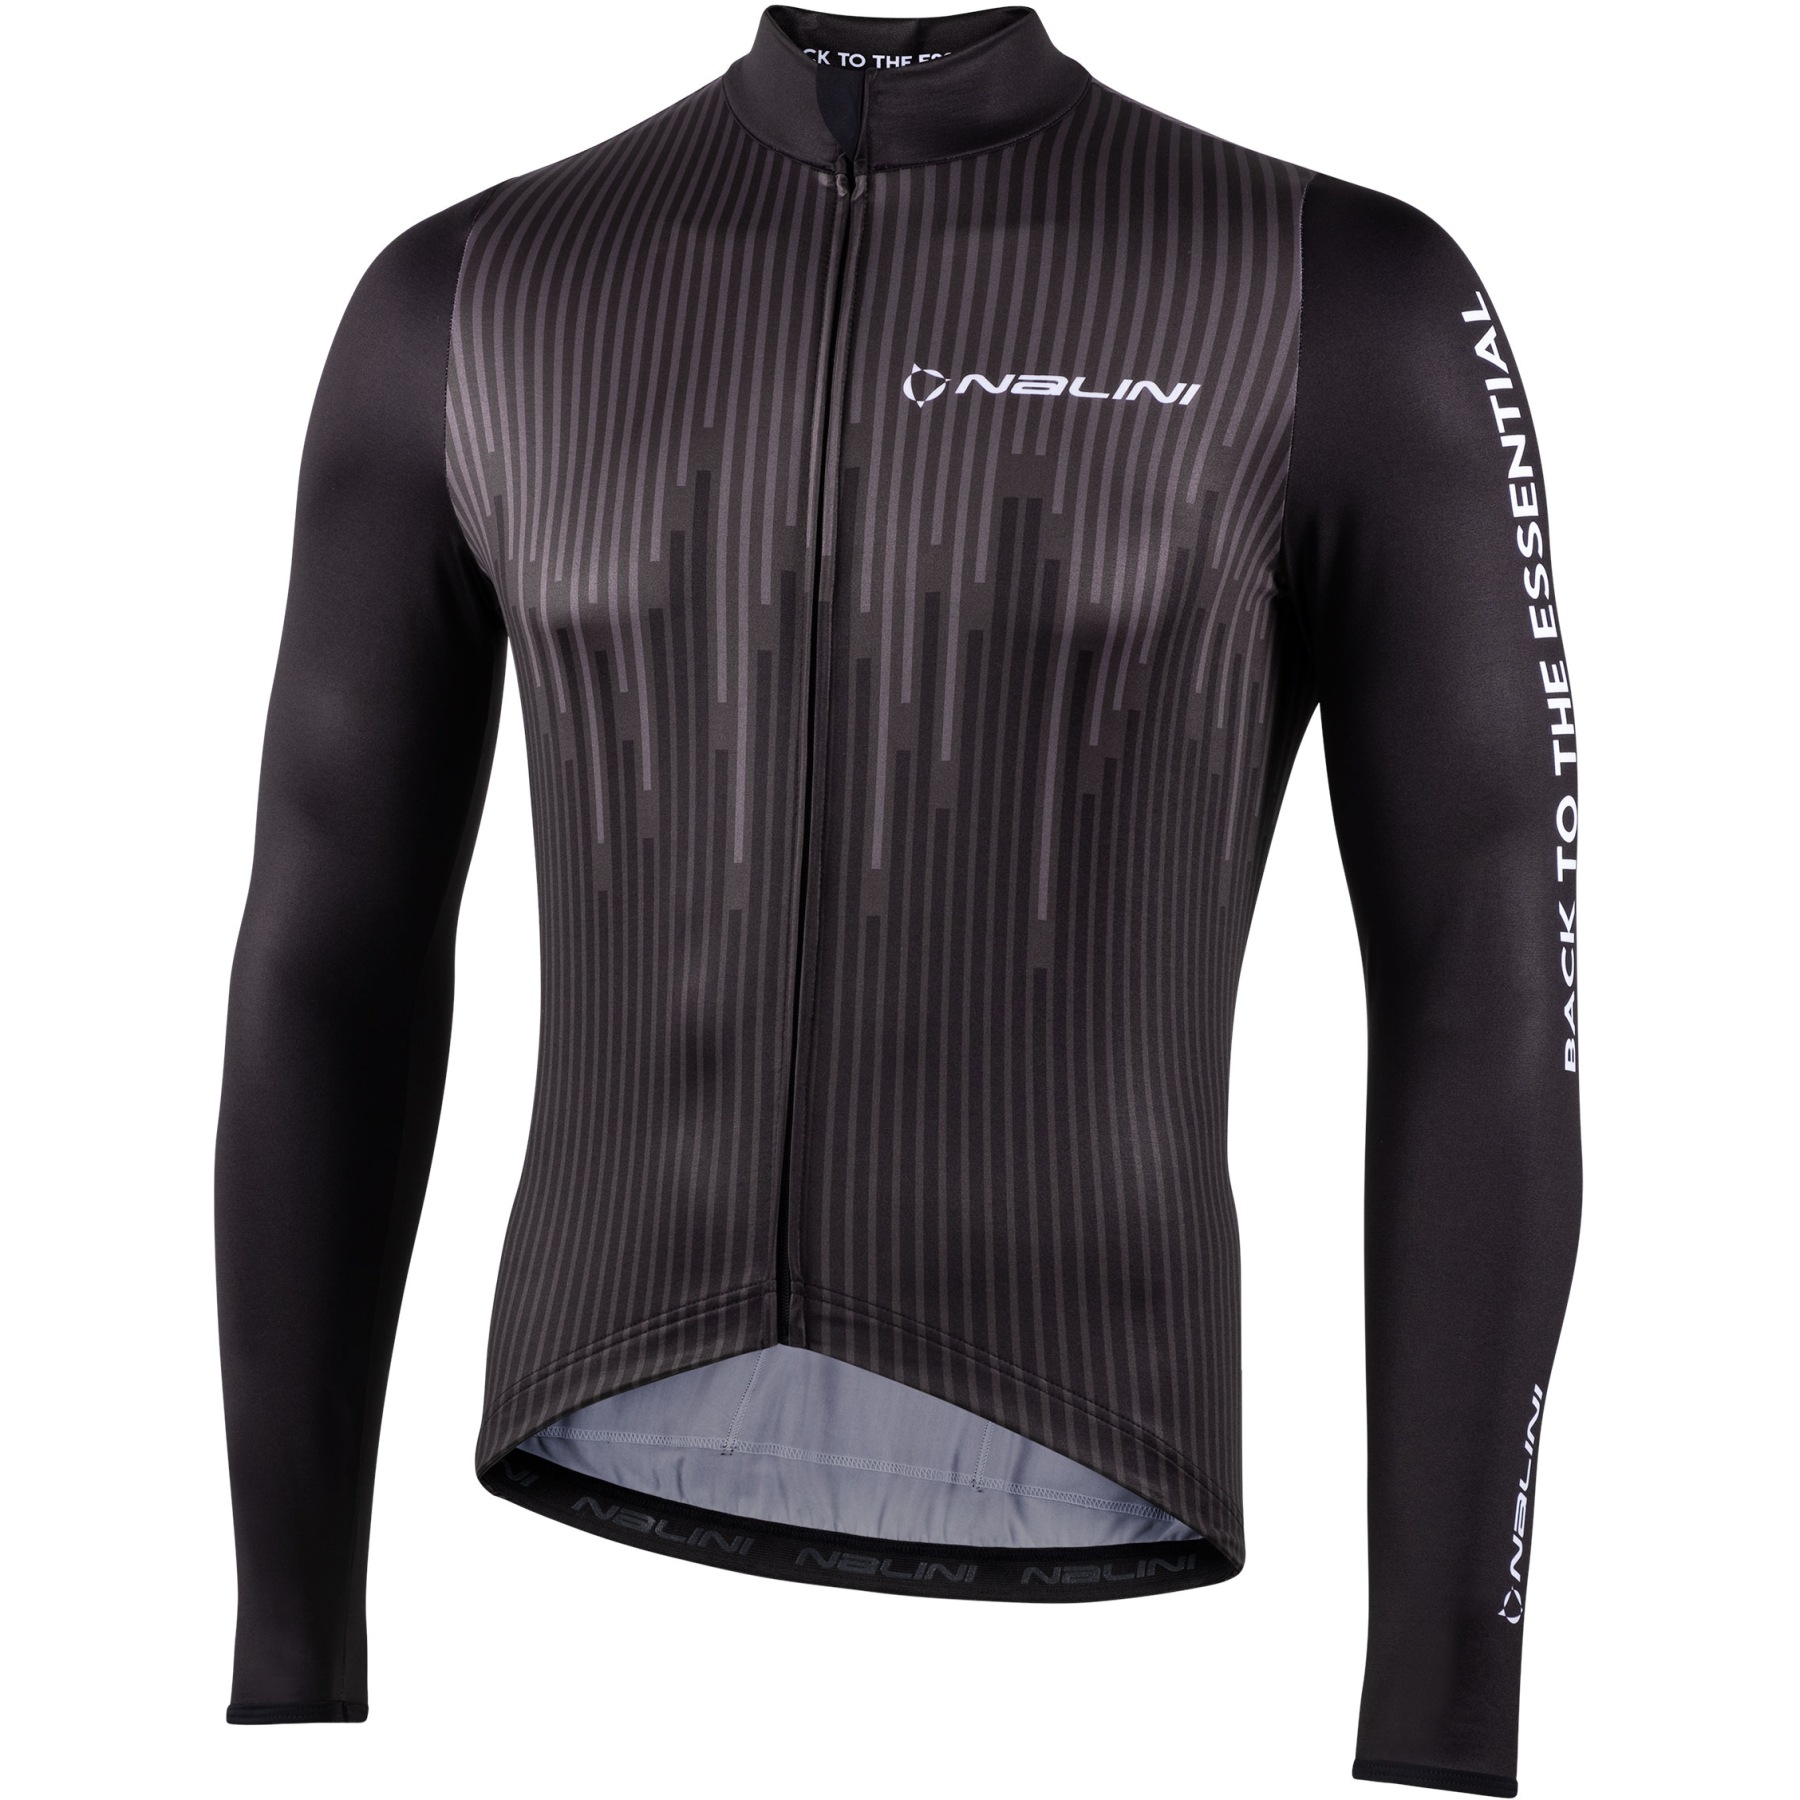 Picture of Nalini New Fit Long Sleeve Jersey - grey/black 4000